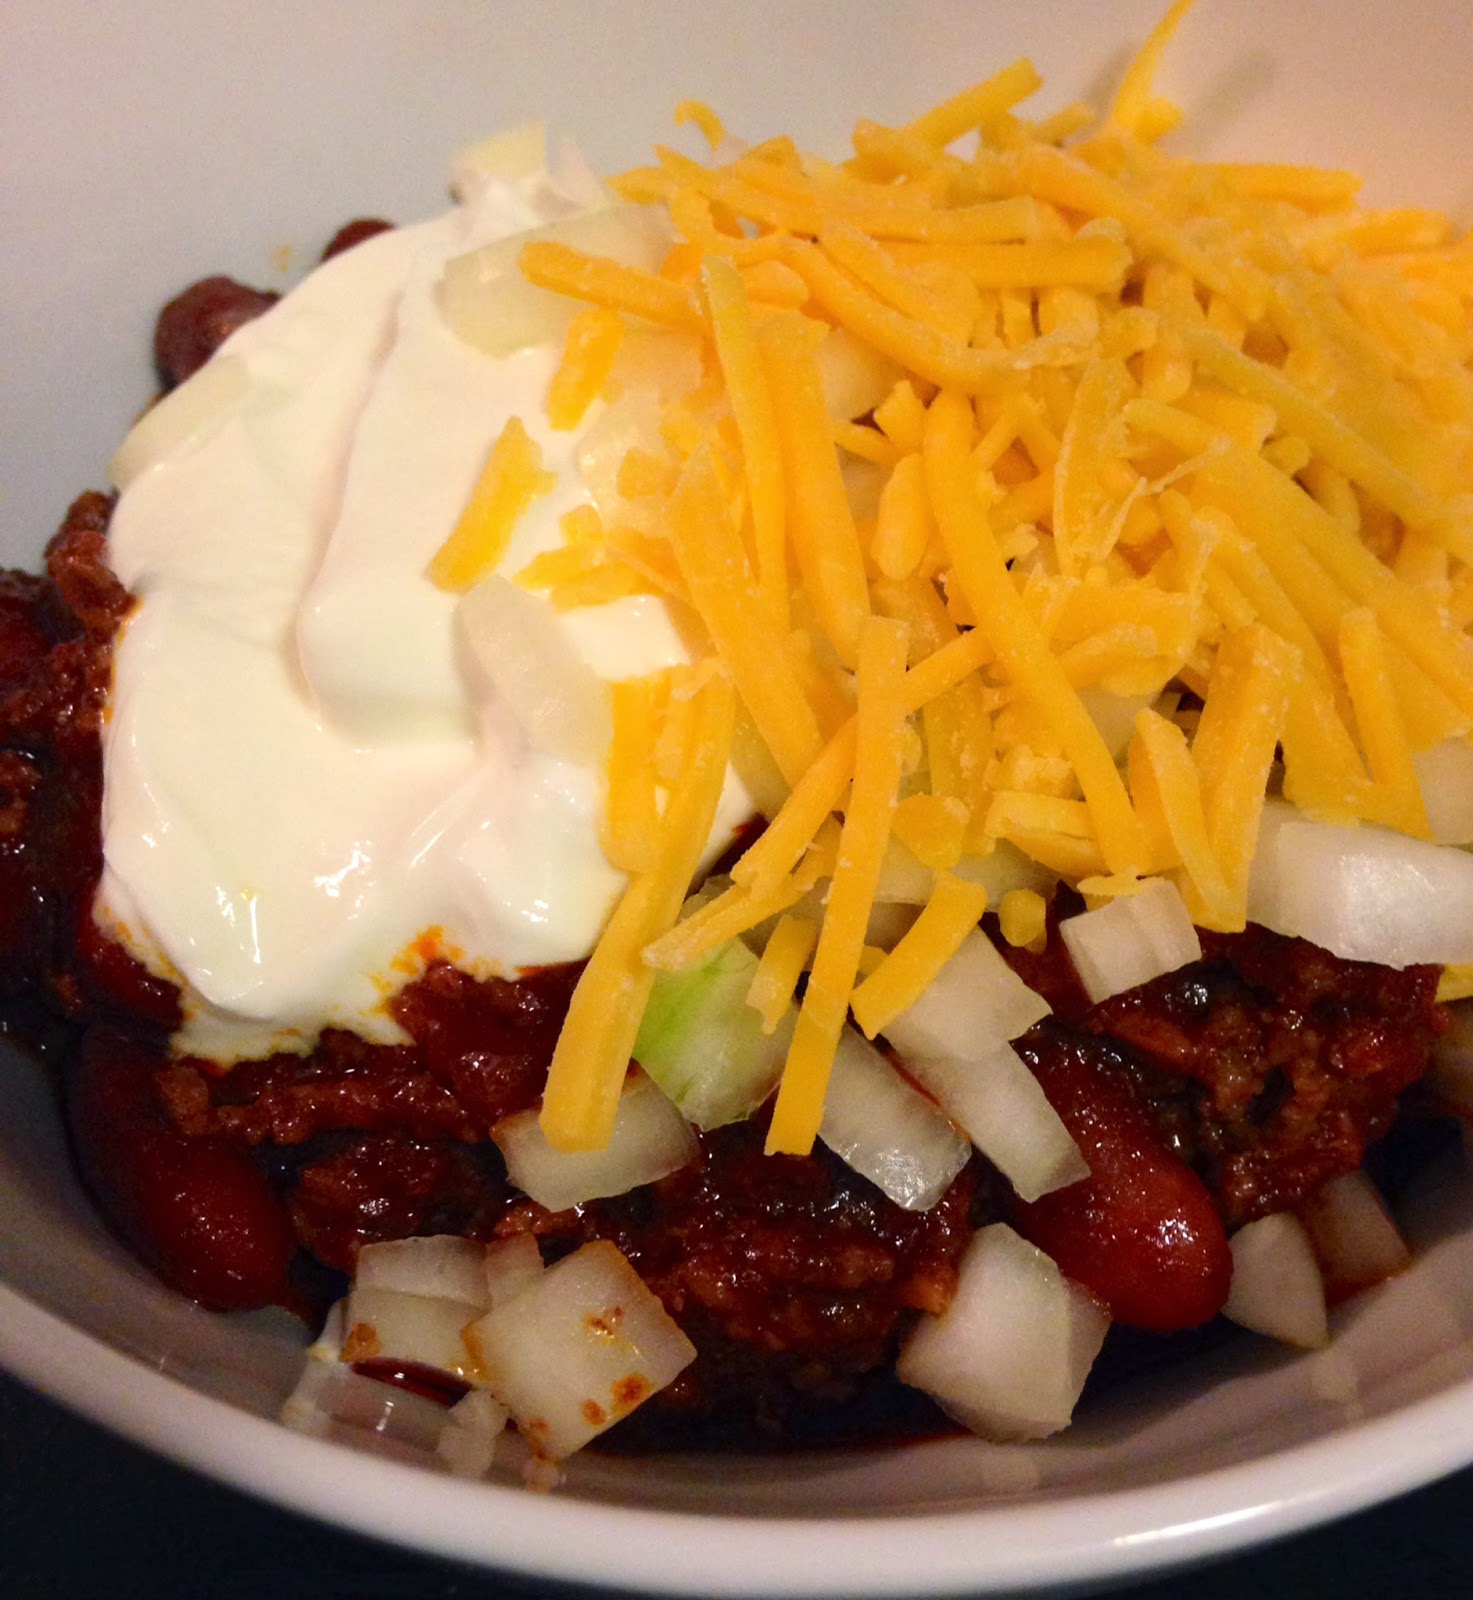 Crafty Shrewd Clyde's Chili for a Snowy Day